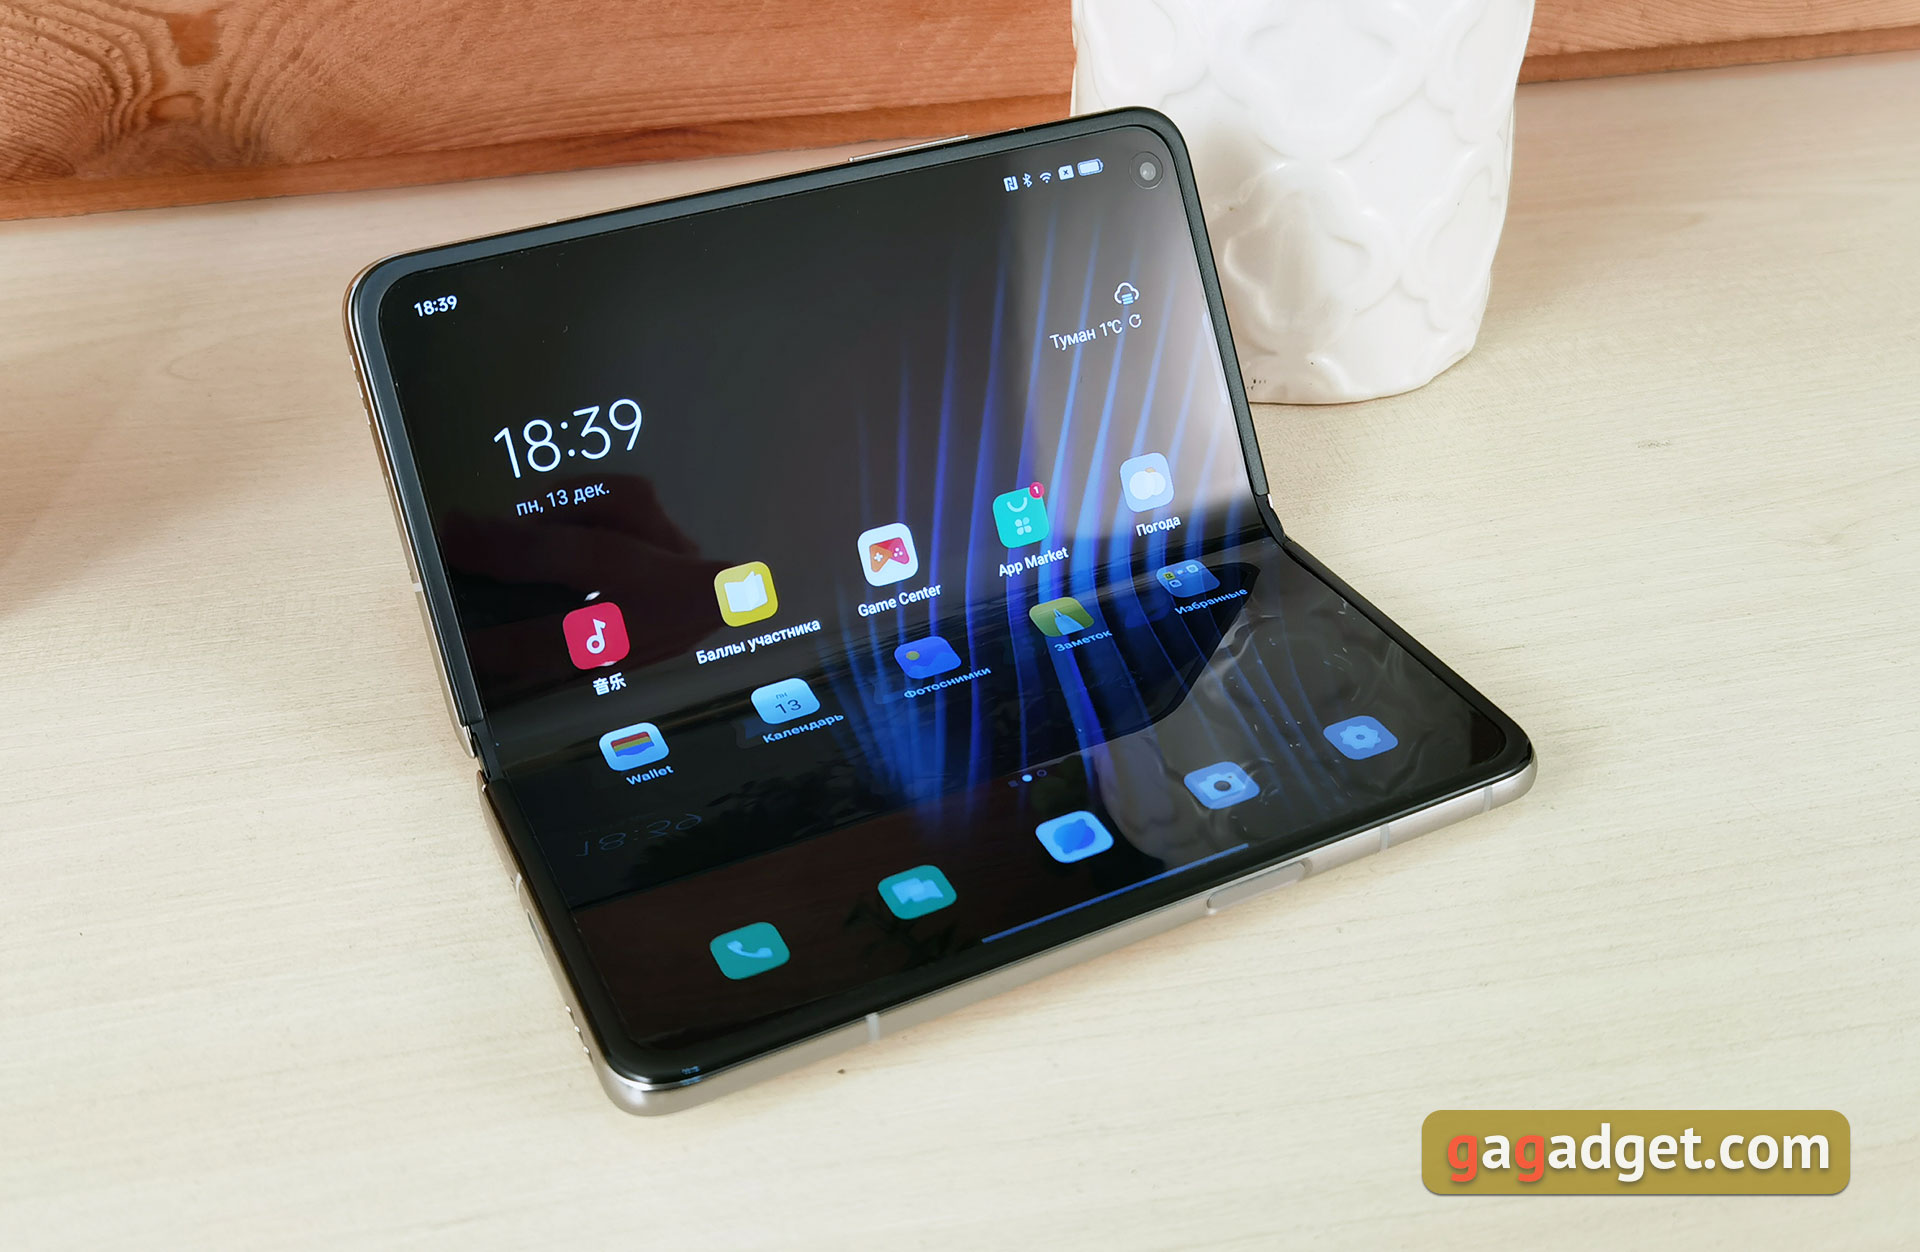 OPPO Find N Review: a Foldable Smartphone with Wrinkle-Free Display